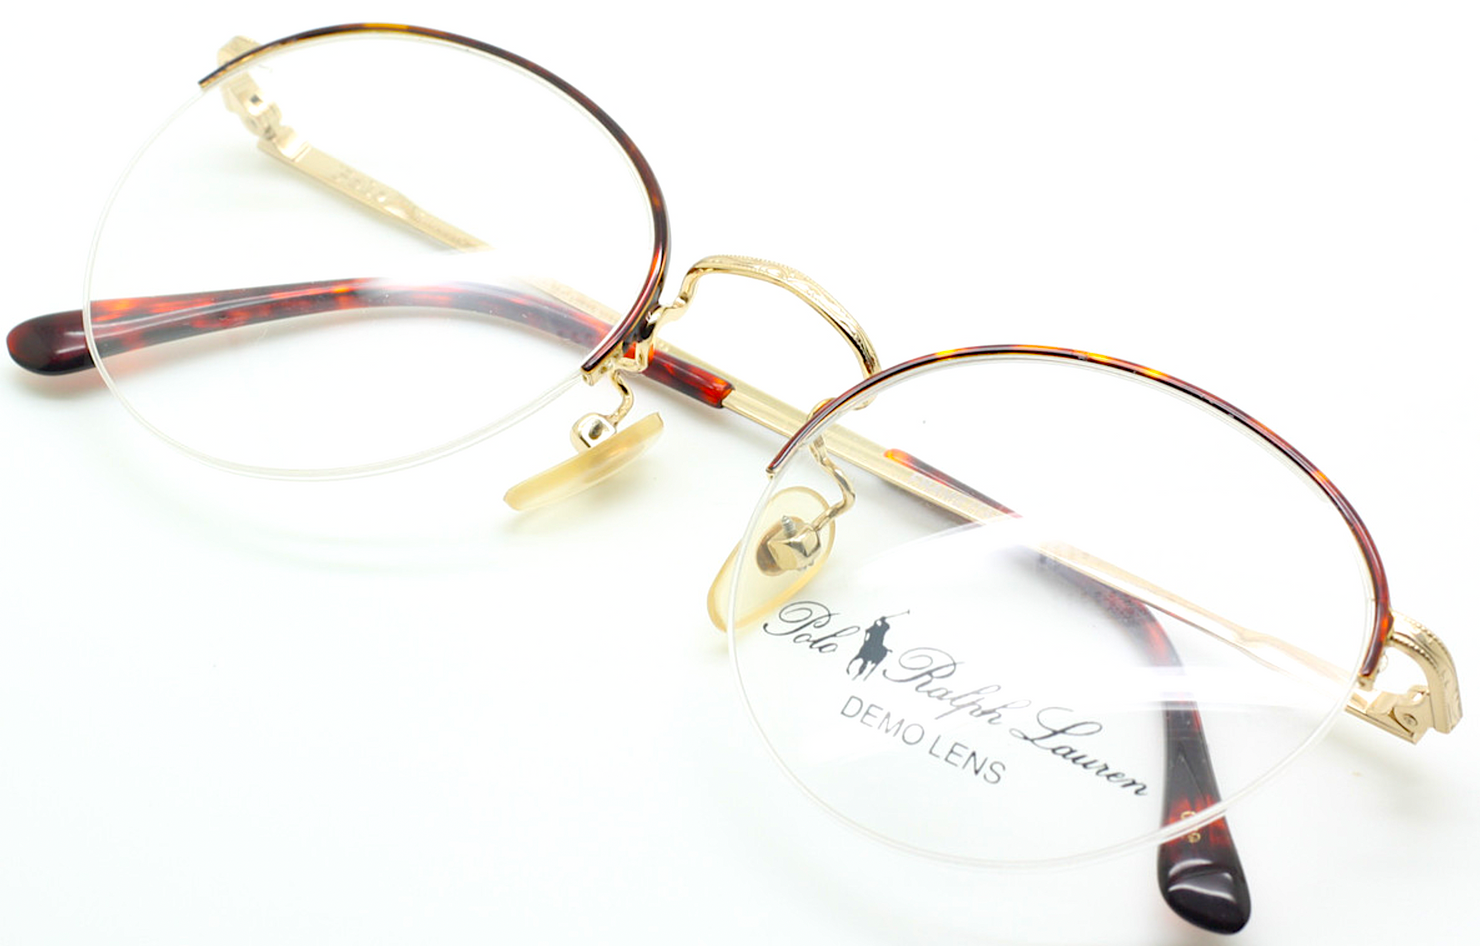 Vintage Half Rim Polo Classic XX Glasses In Havana Gold and Tortoiseshell  Effect Panto Style Frames By Ralph Lauren - The Old Glasses Shop Ltd